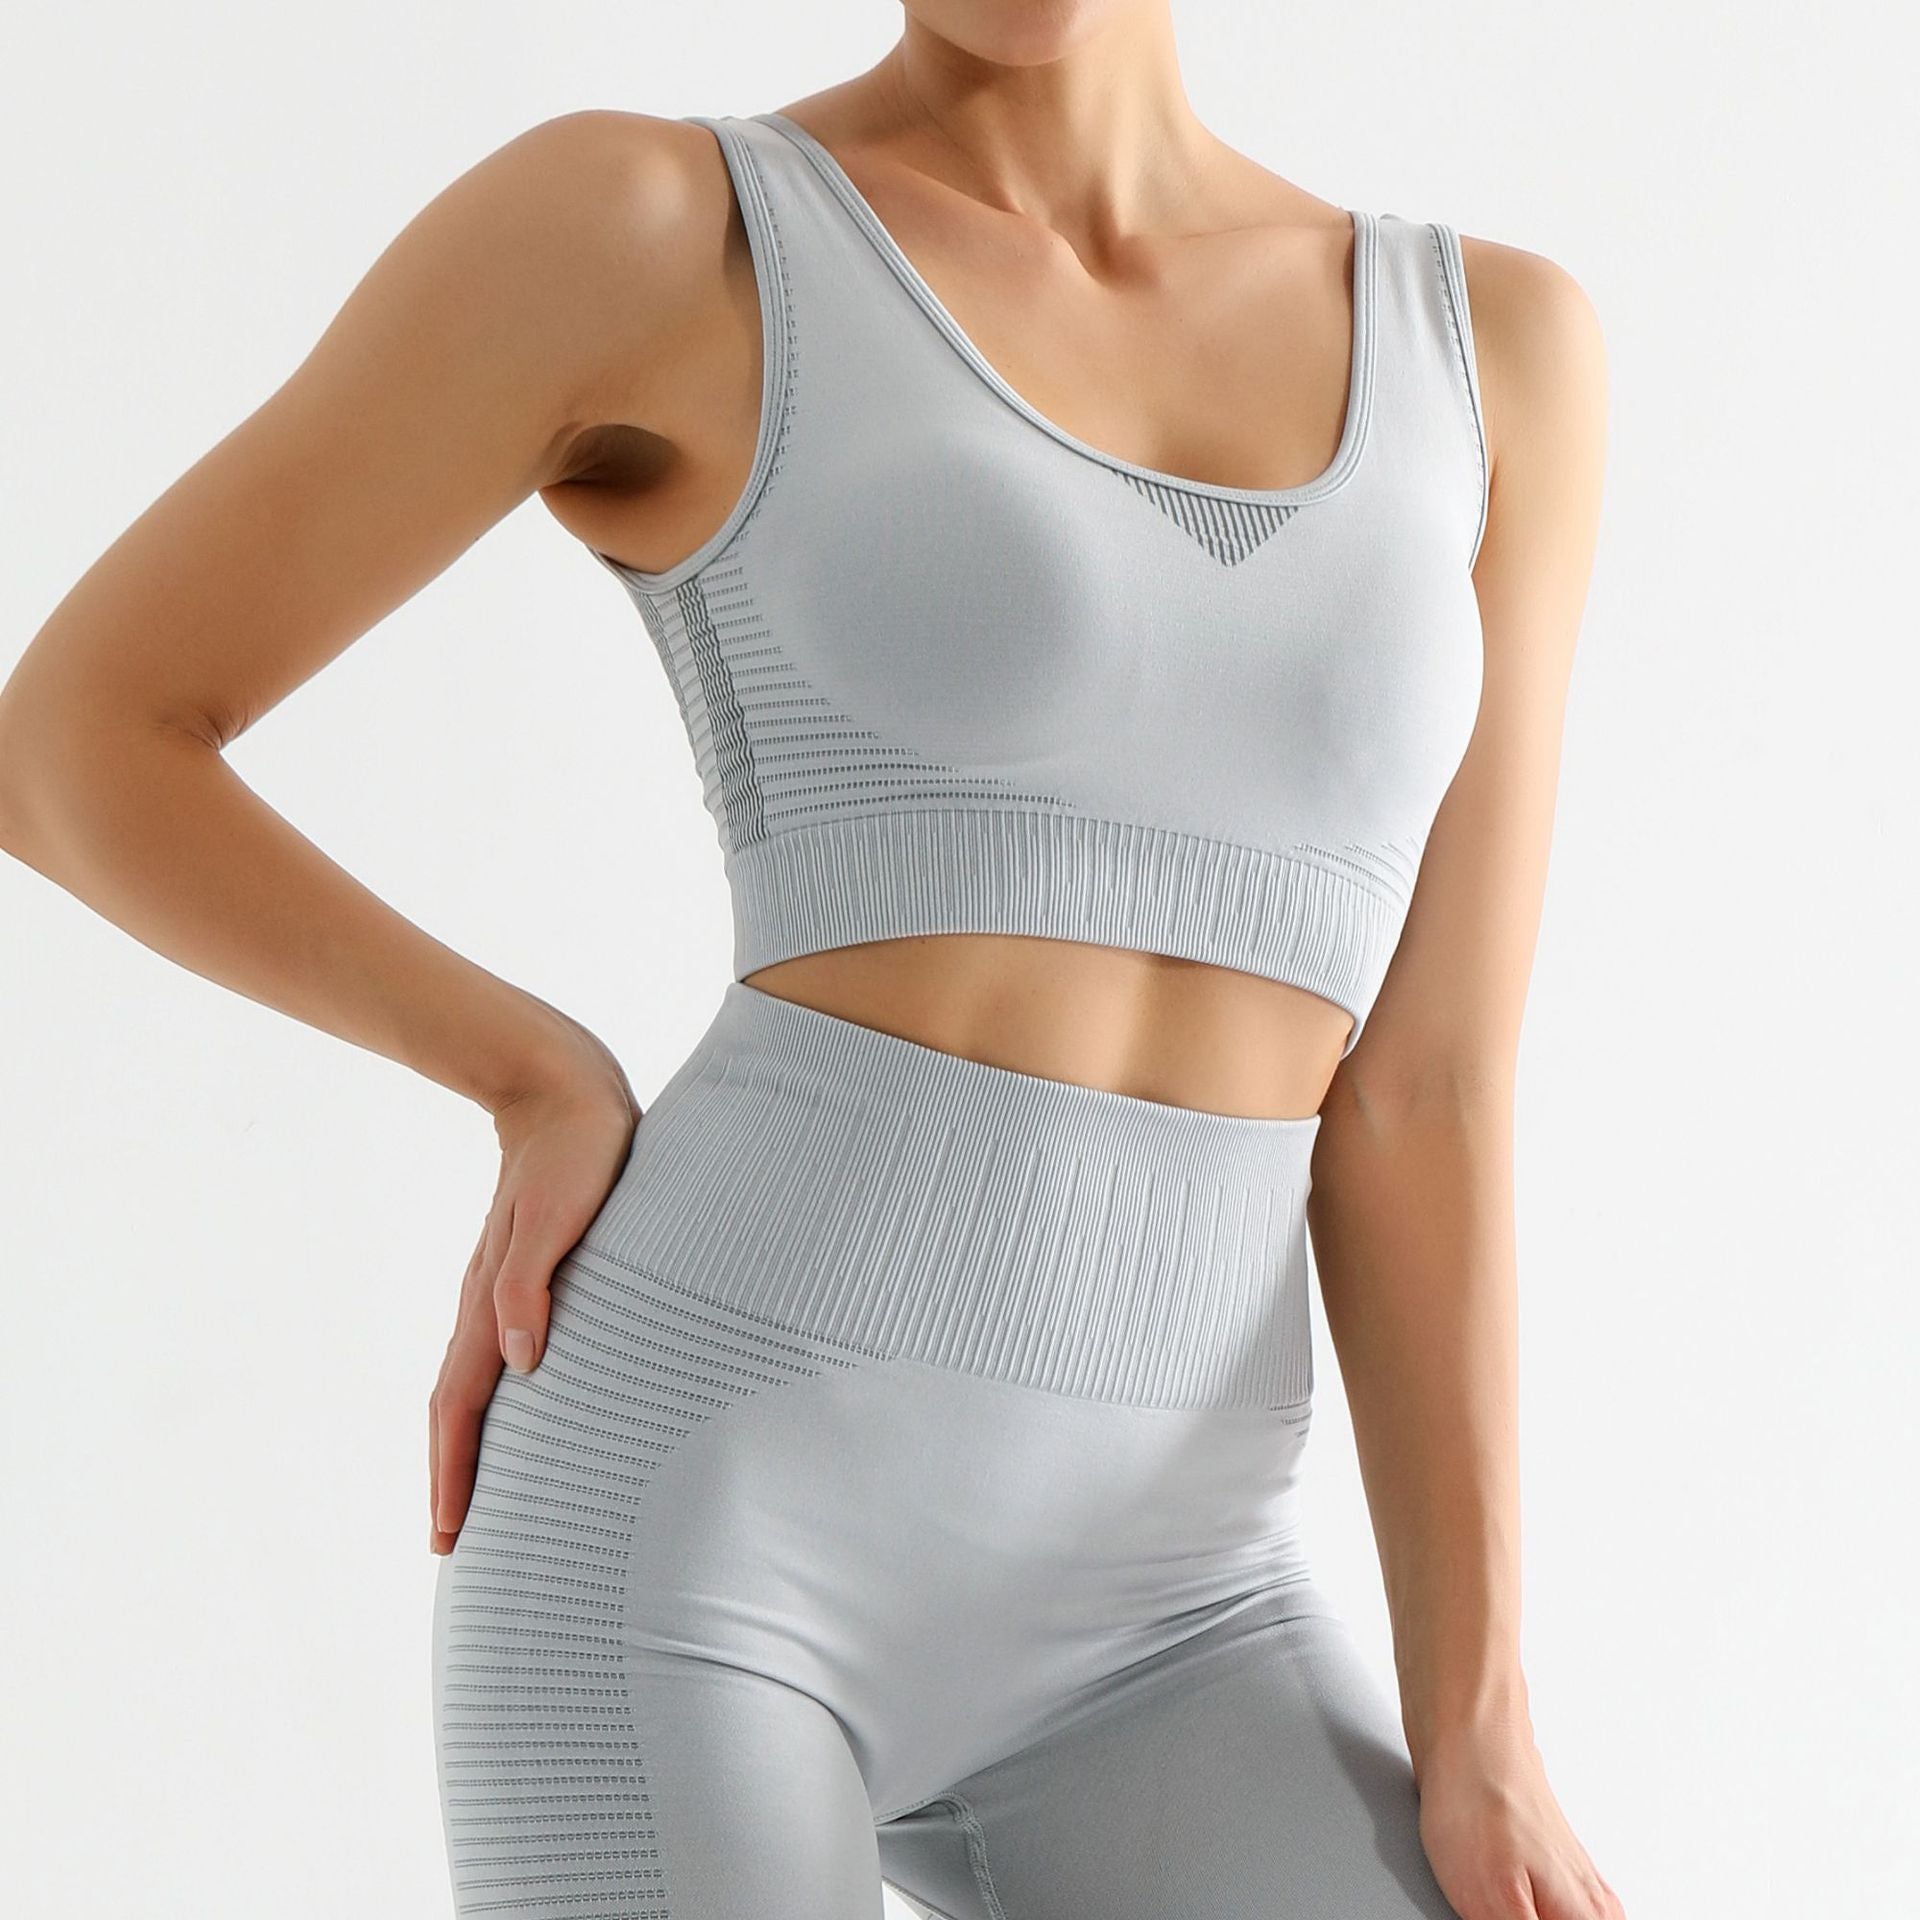 RISE UP FLAWLESS KNIT COMPRESSION OUTFIT – SVANA Fit